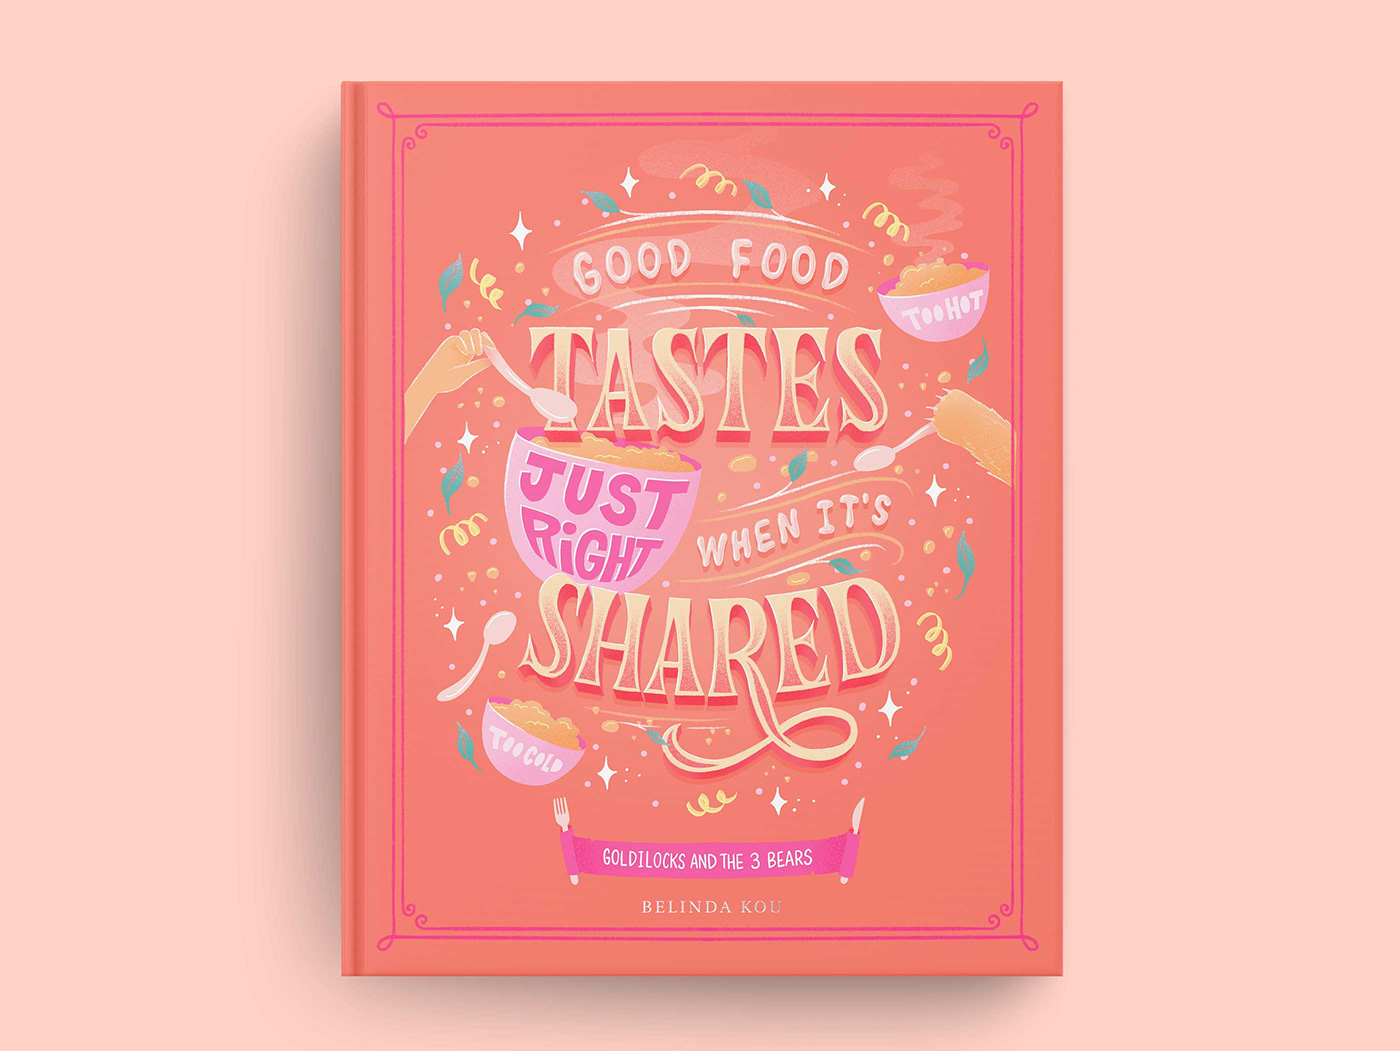 Goldilocks book cover art featuring hand lettering and illustrations of fairy tale and food art